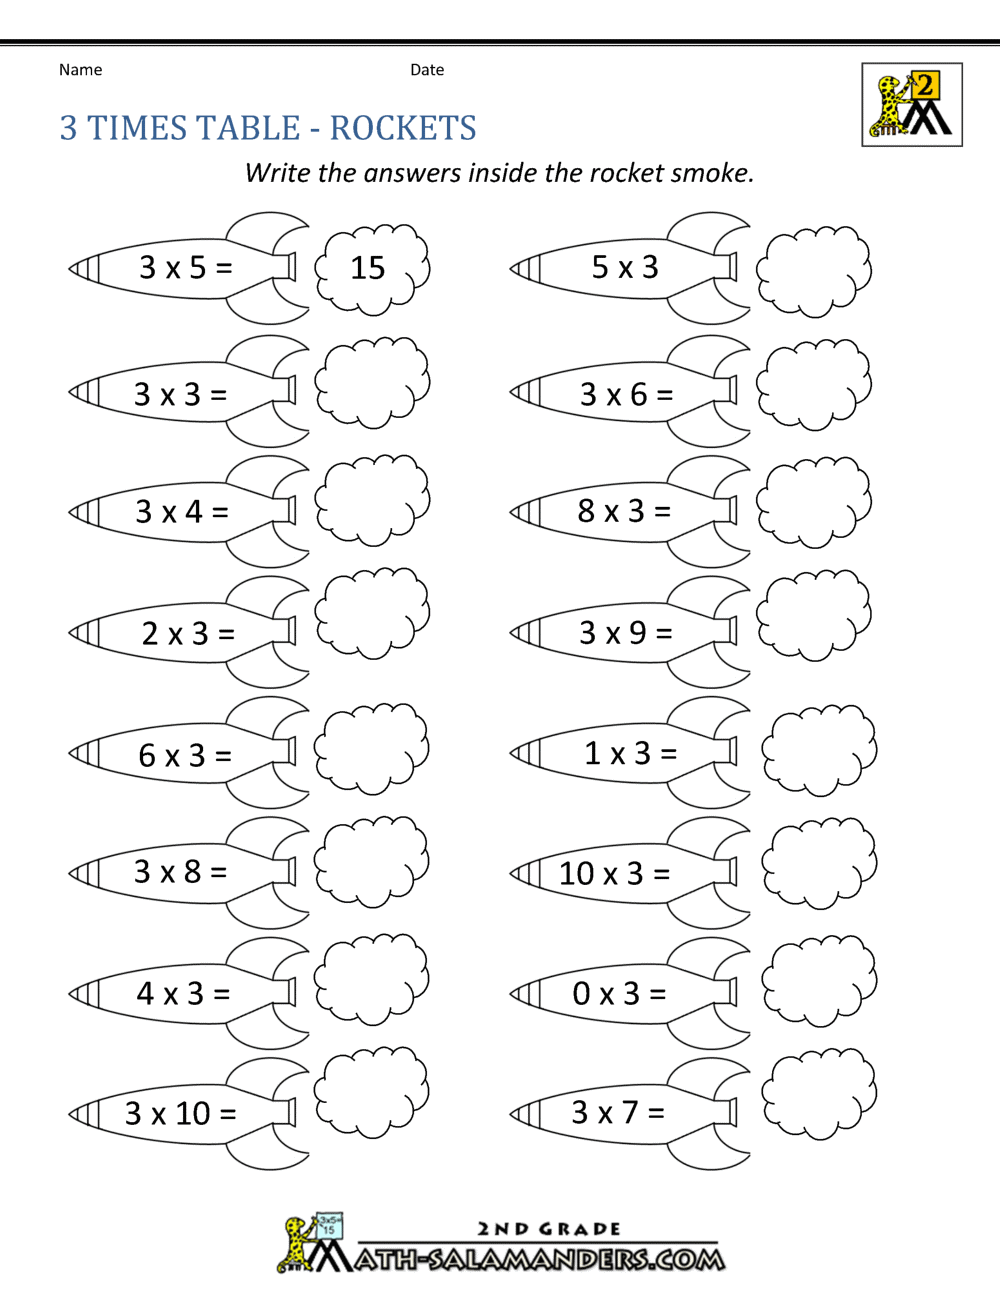 22 Times Table In 3 Times Table Worksheet